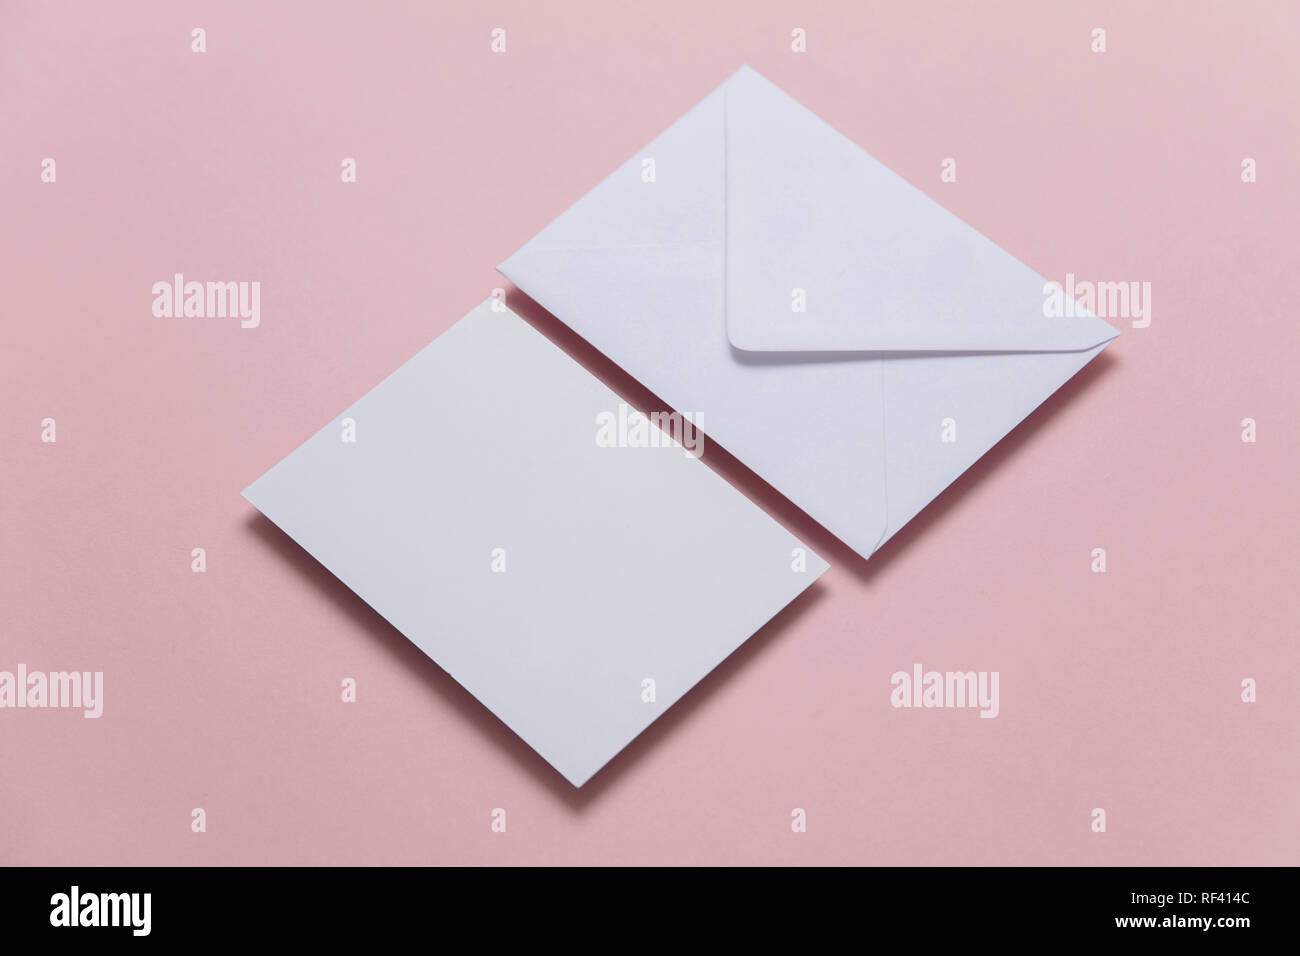 Download Blank White Card With Paper Envelope Template Mock Up Stock Photo Alamy